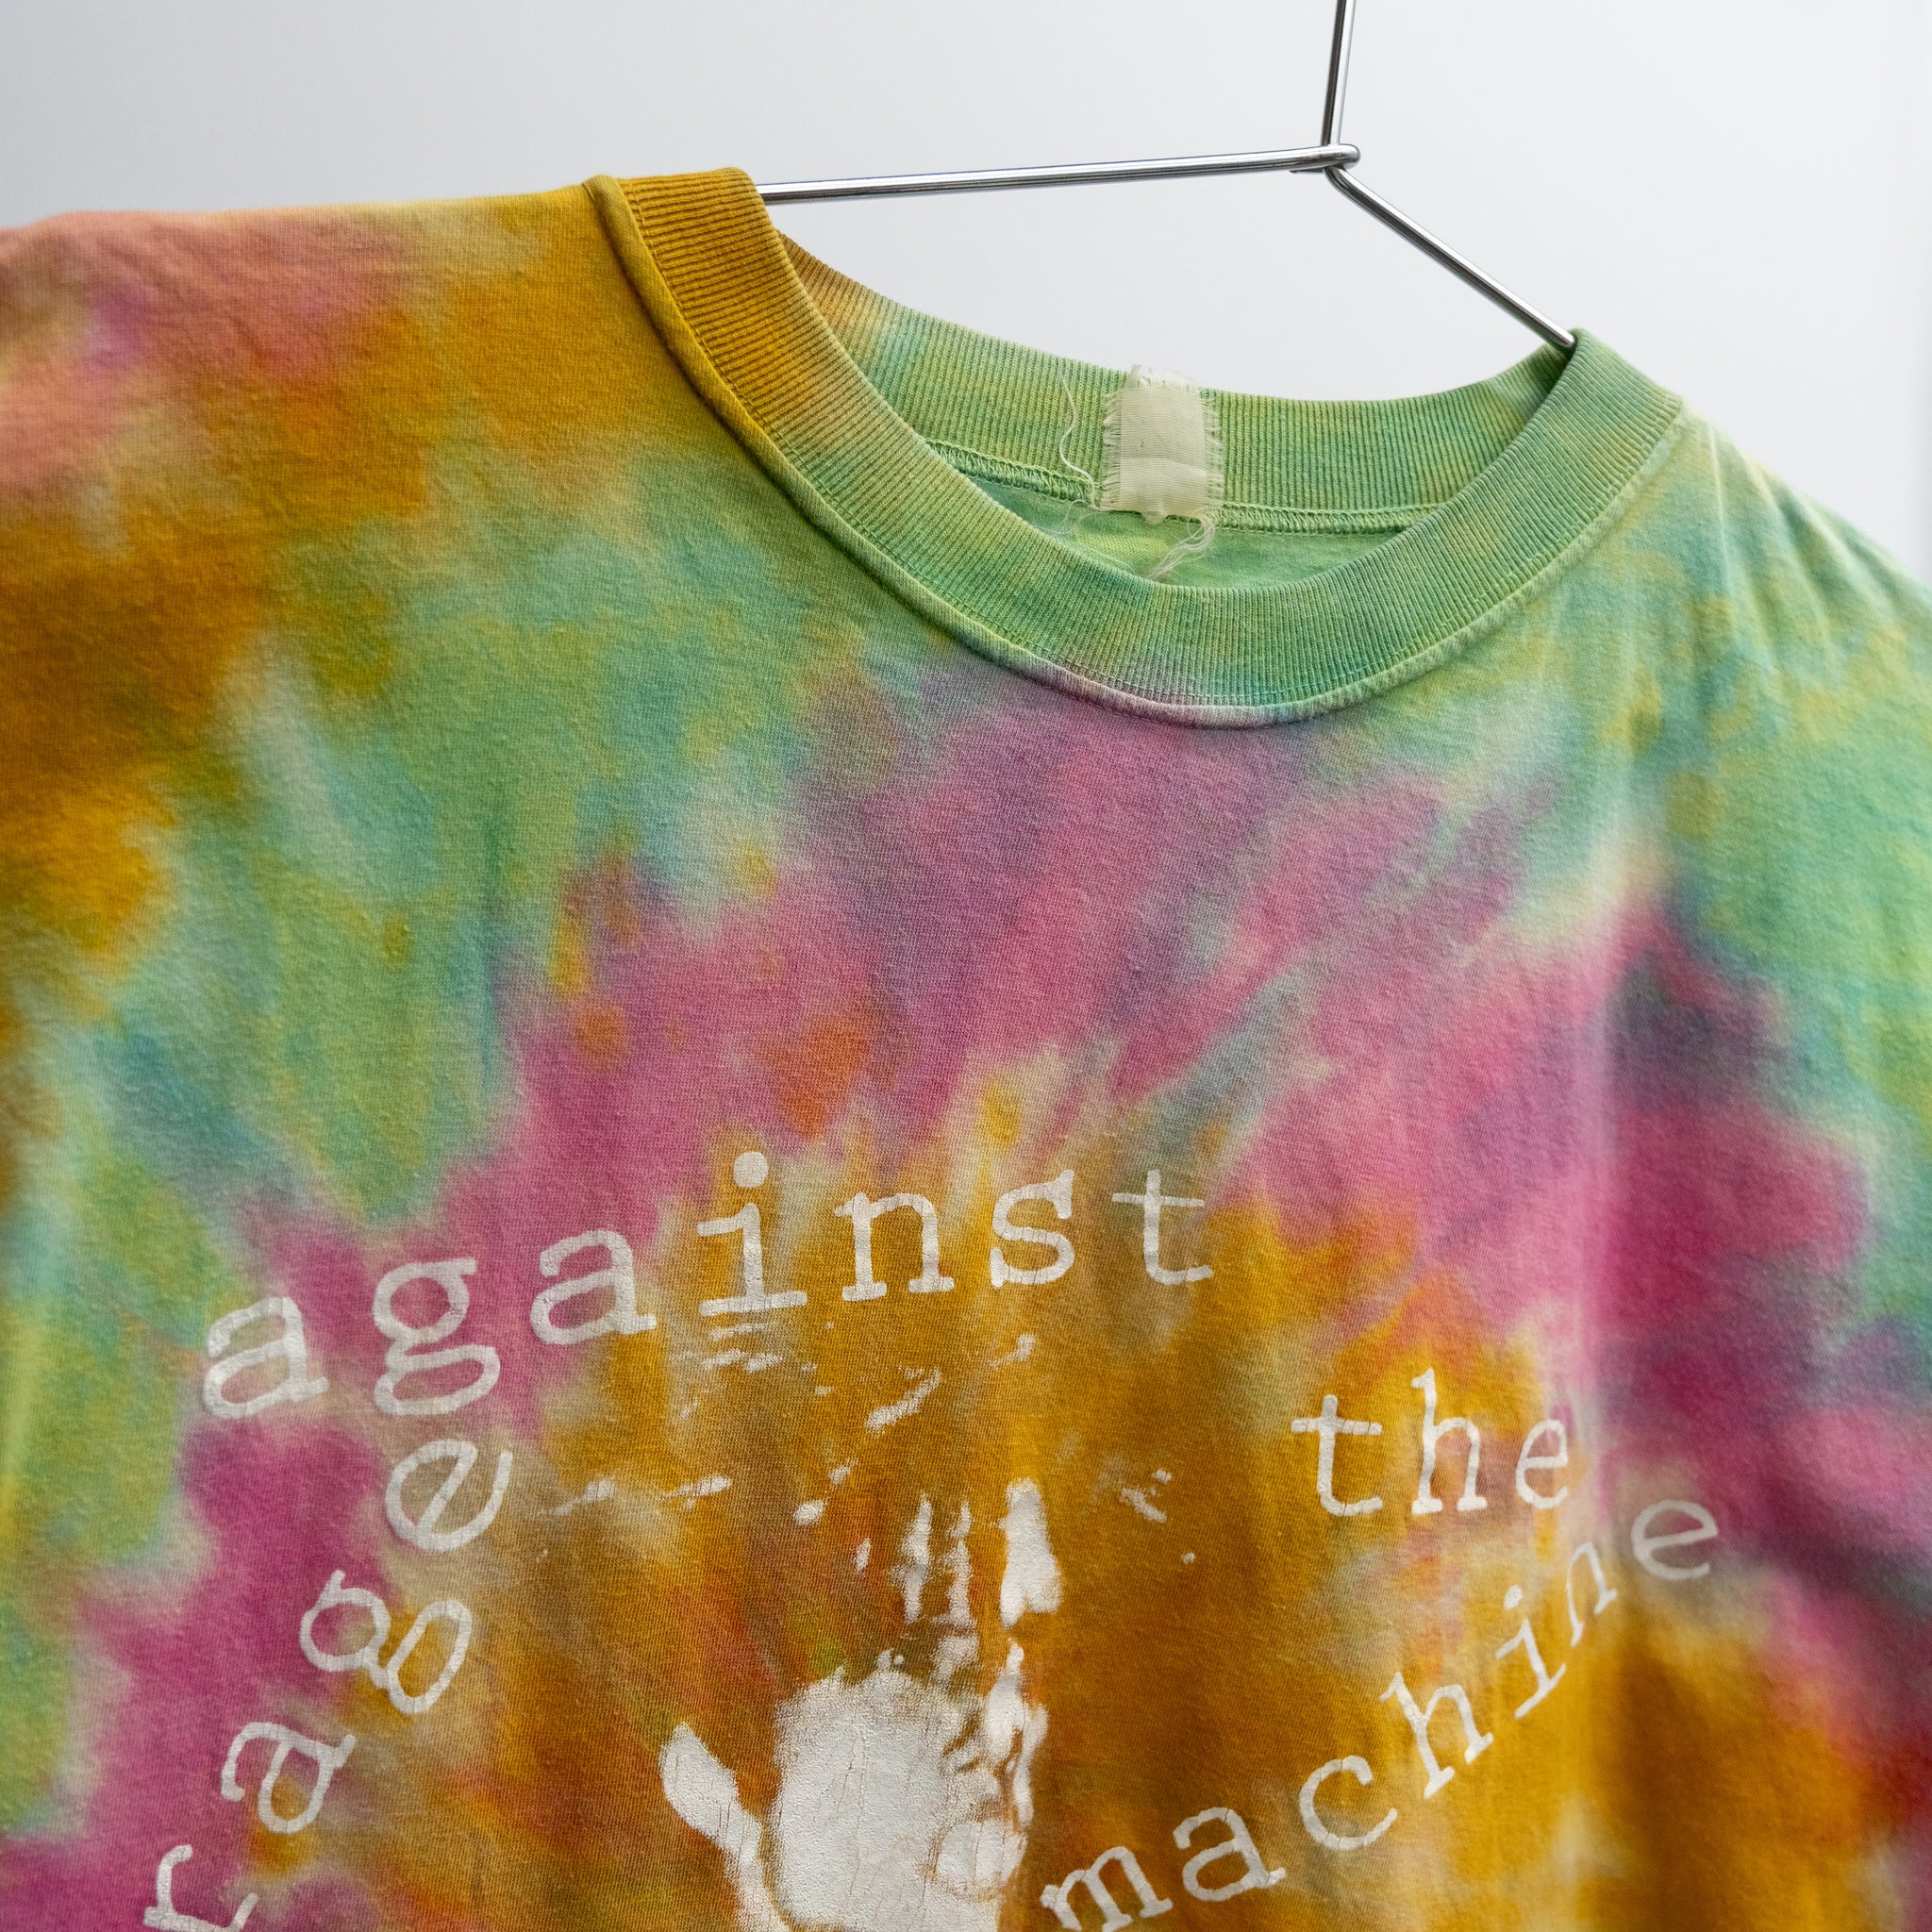 RAGE AGAINST THE MACHINE 'KILLING THE NAME' LONG-SLEEVE TEE - 1990'S